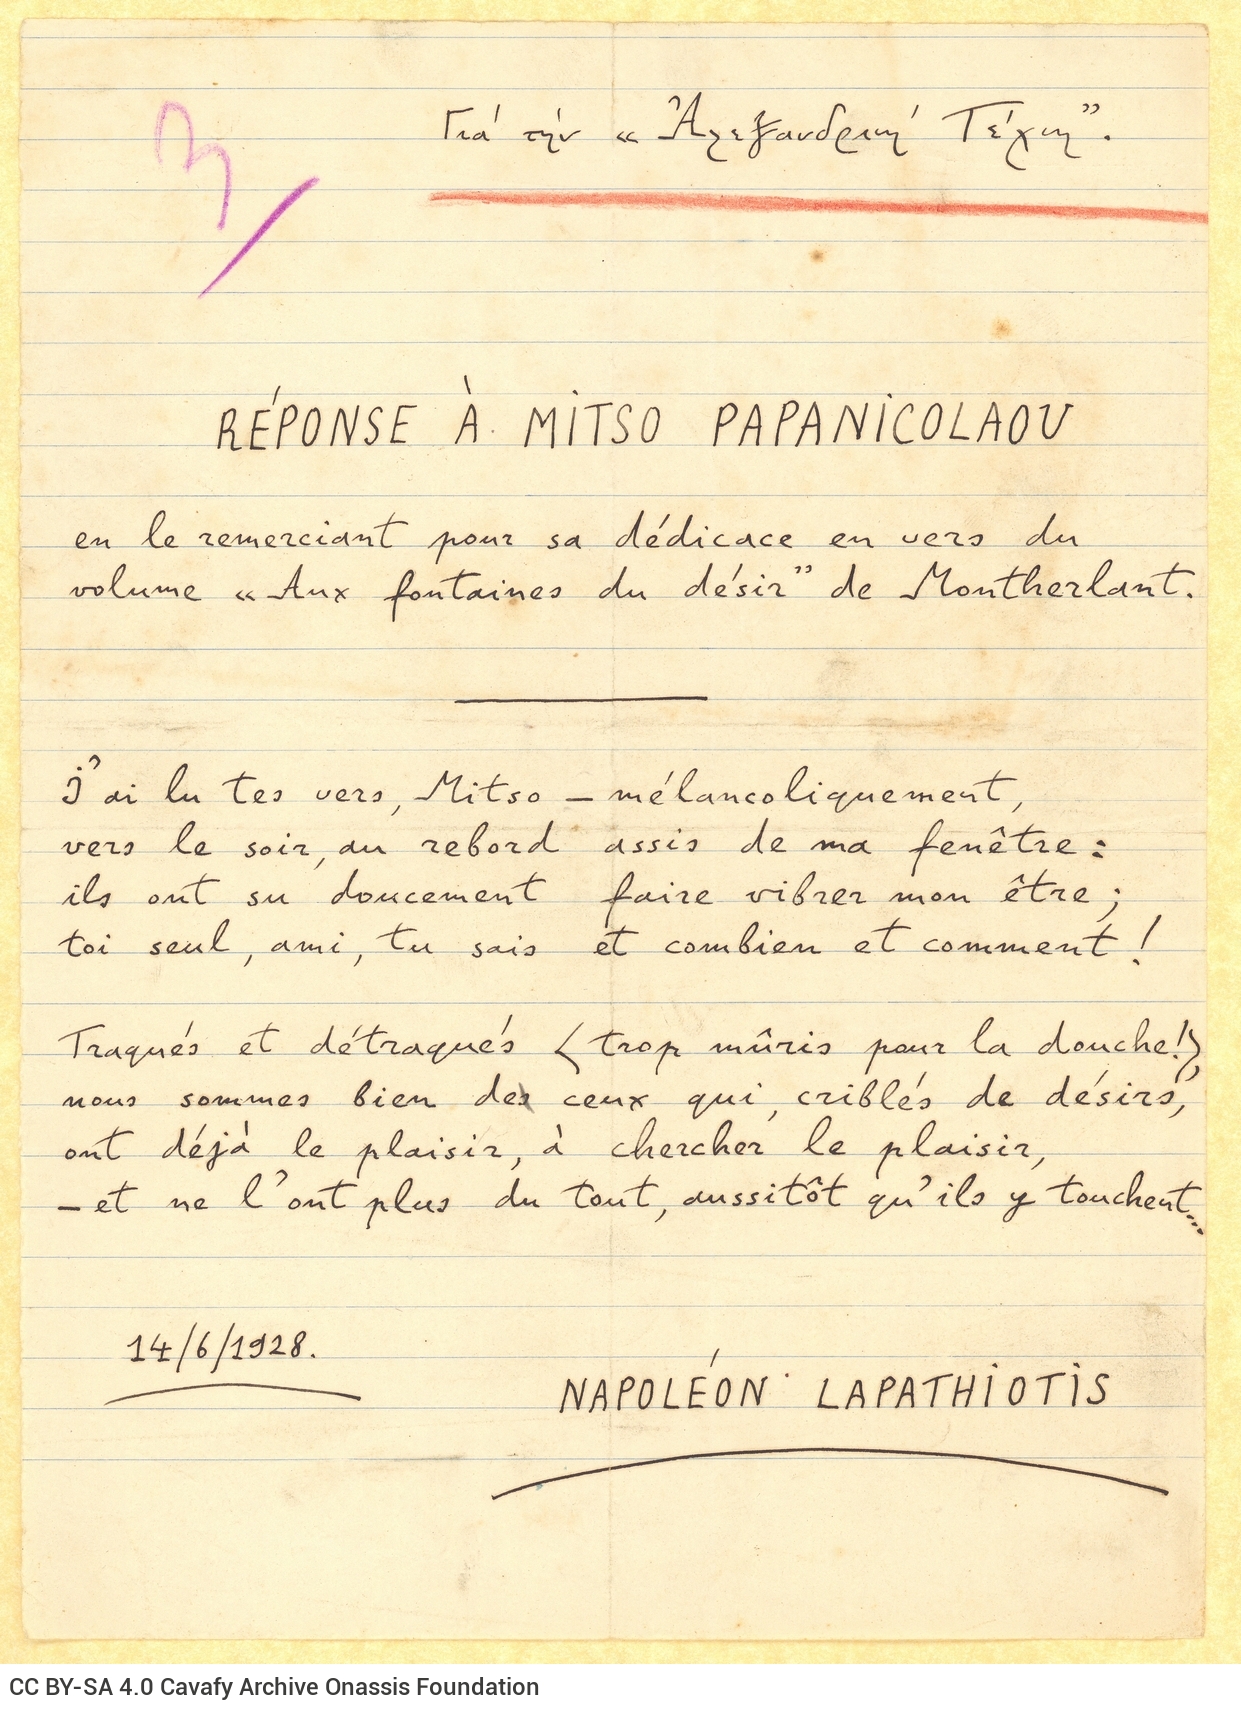 Handwritten poem by Napoleon Lapathiotis in French. According to the handwritten introductory note, this is an expression 